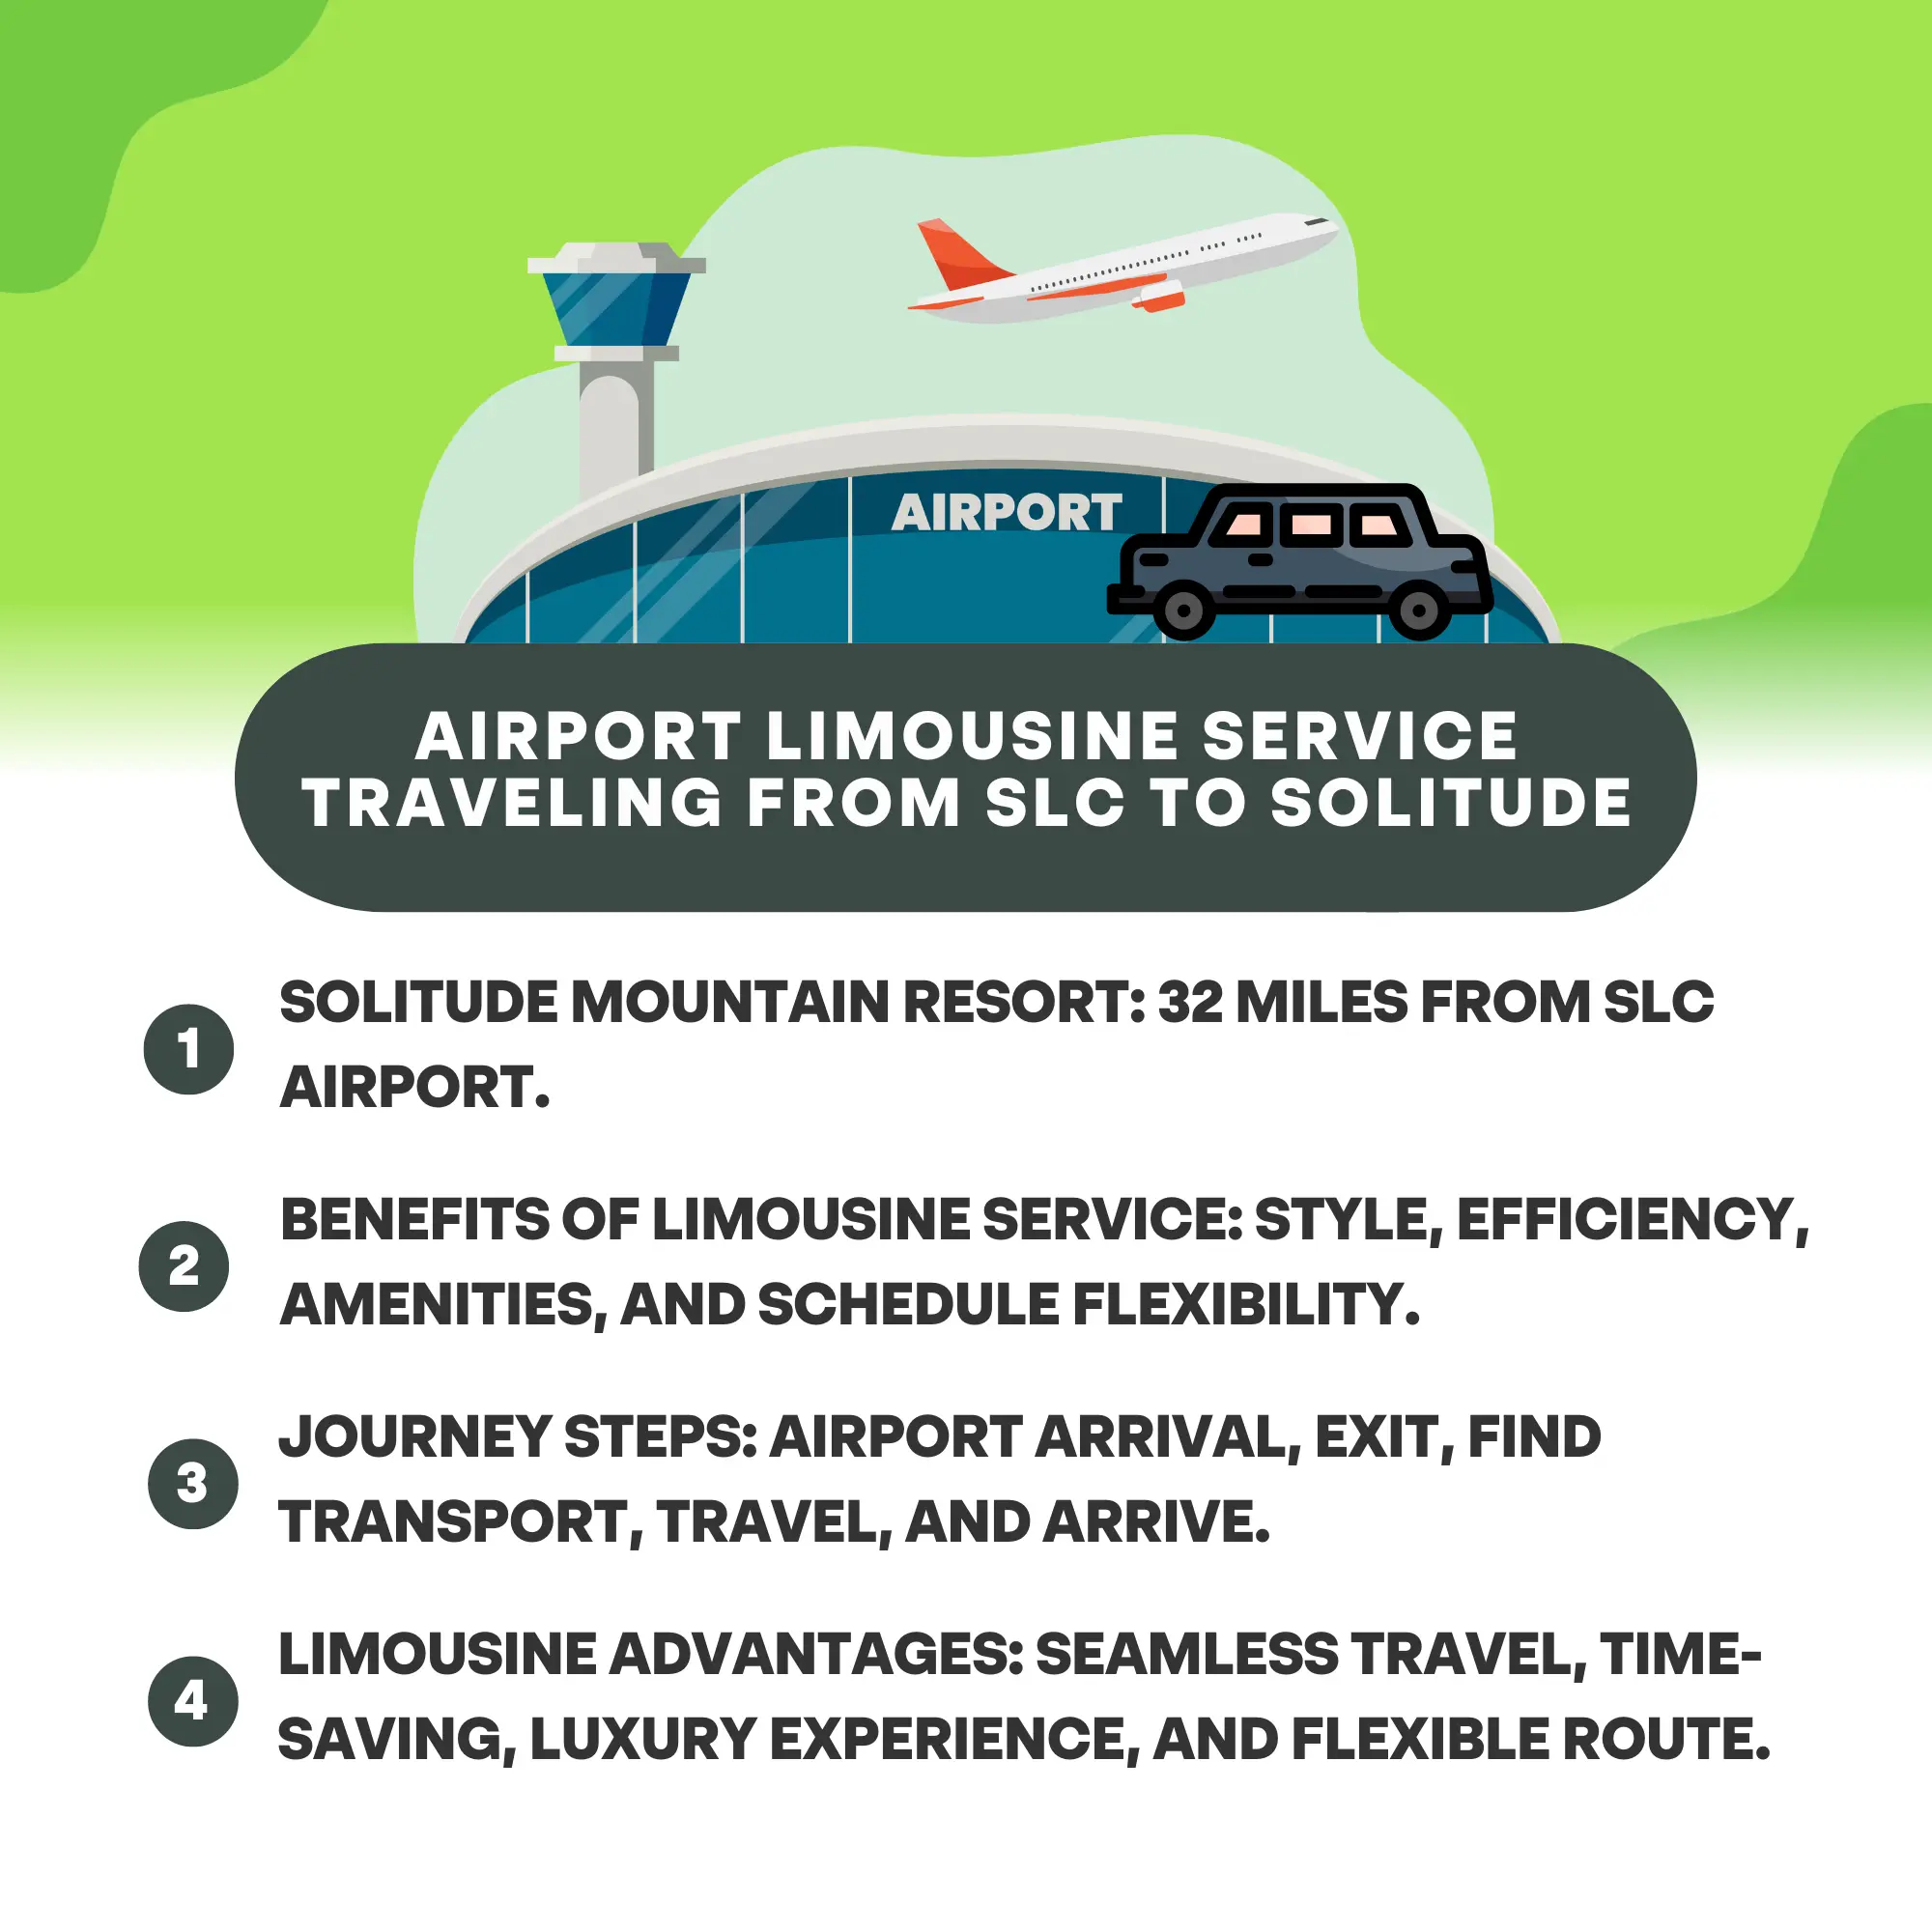 Airport Limousine Service: Traveling From SLC to Solitude